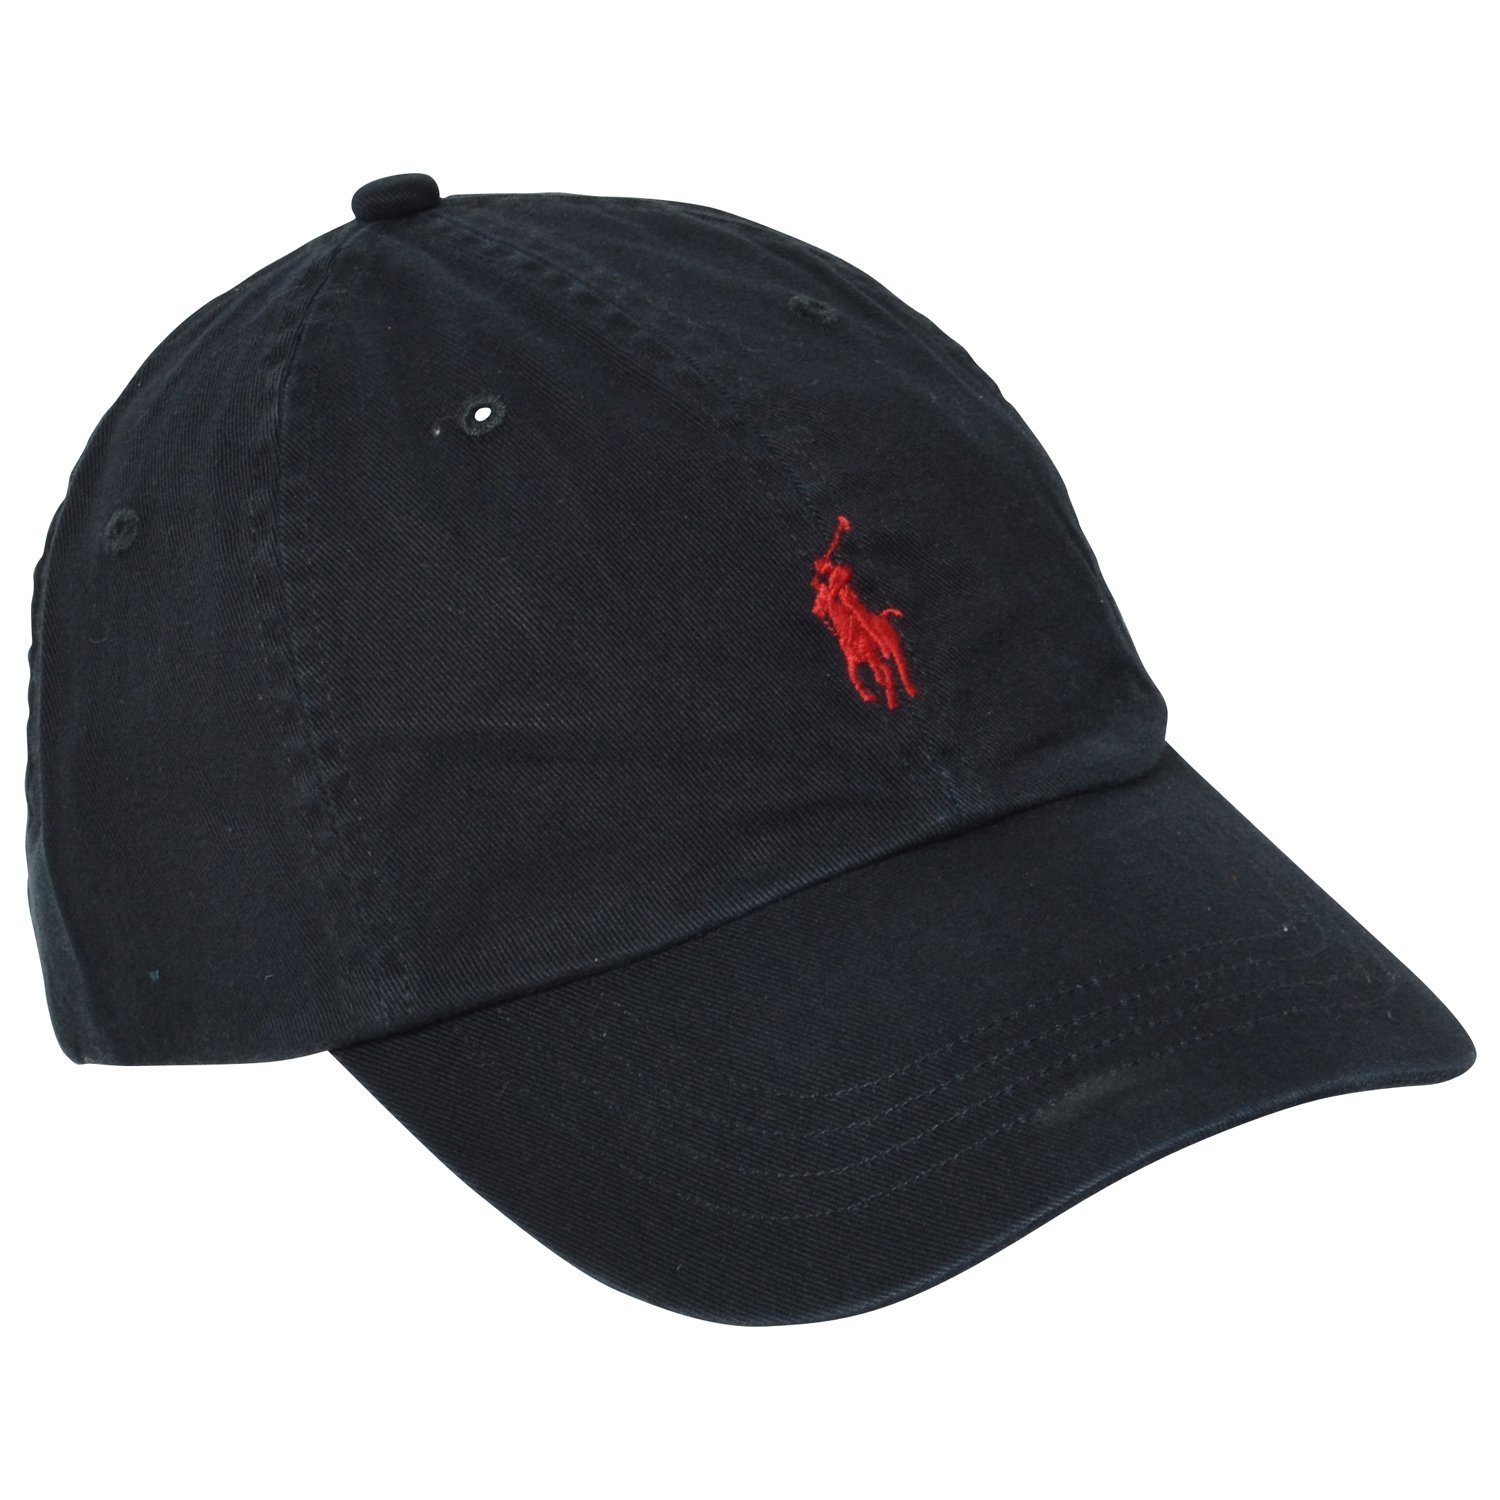 black polo hat with red horse